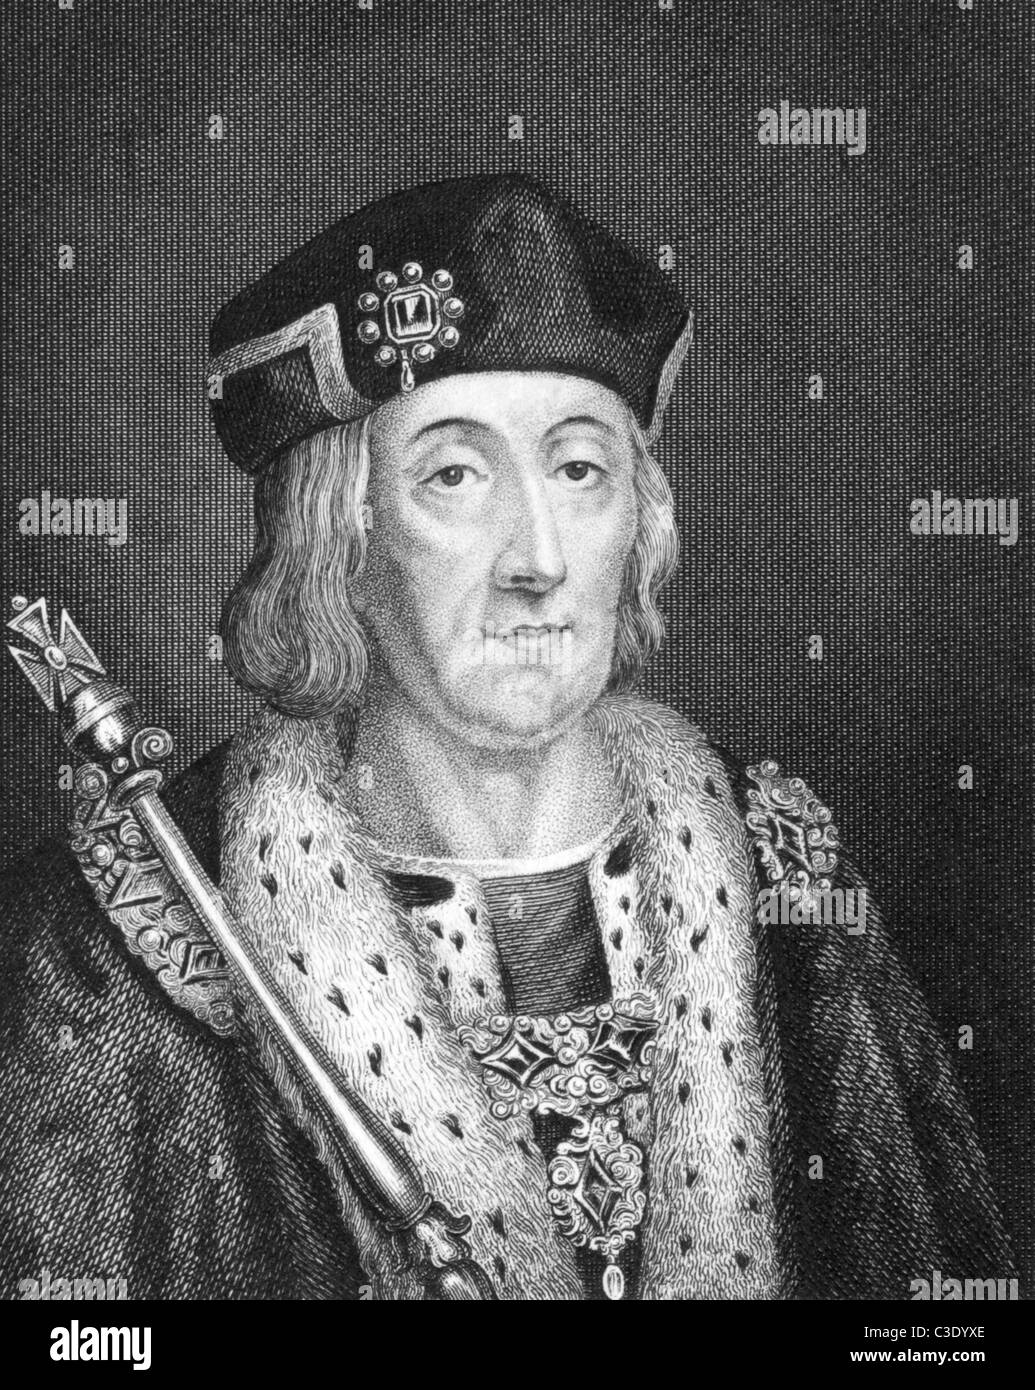 Henry VII (1457-1509) on engraving from 1830. King of England and Lord of Ireland during 1485-1509. Stock Photo